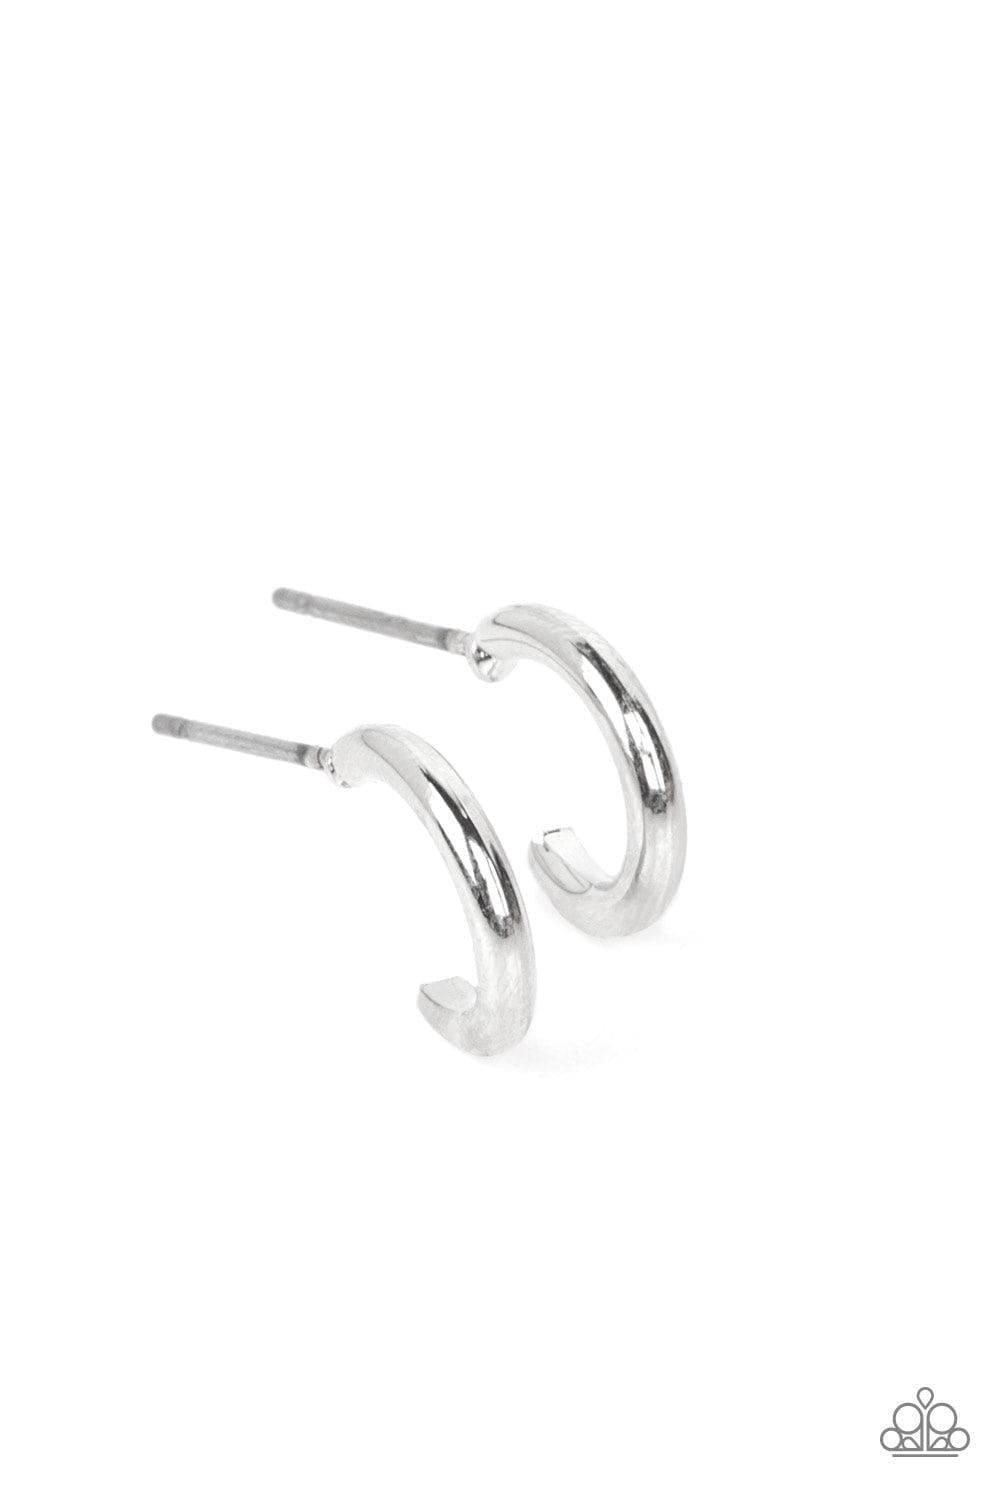 Paparazzi Accessories - Skip The Small Talk - Silver Small Hoop Earrings - Bling by JessieK